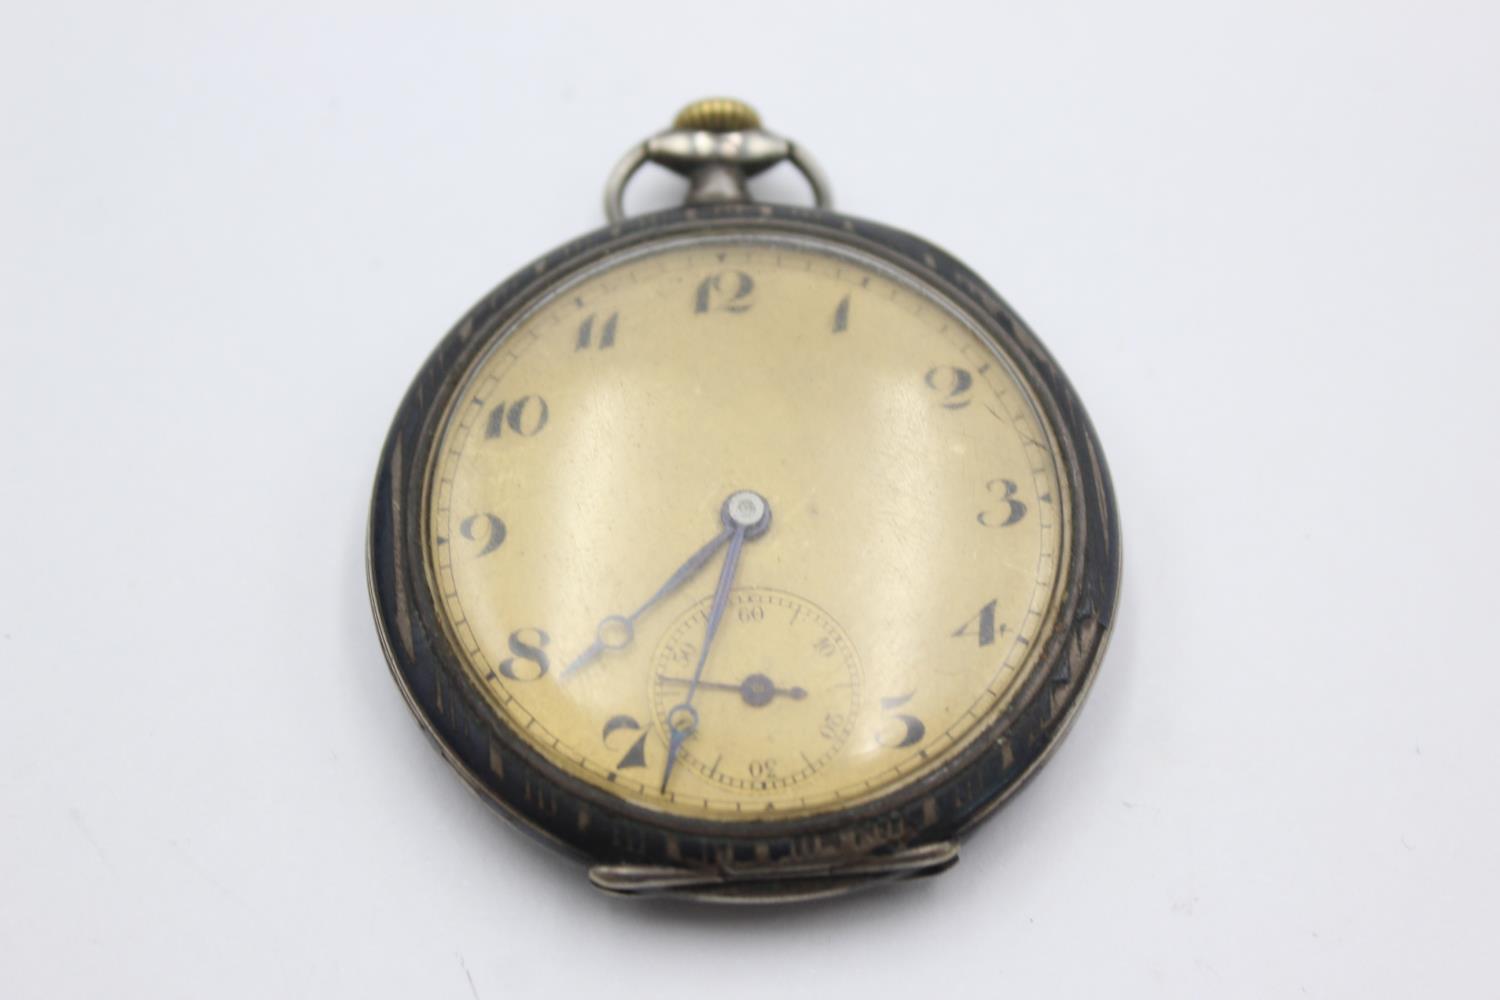 Vintage Gents ORTA 800 SILVER Cased Open Face POCKET WATCH Hand-Wind WORKING 63g Vintage Gents 'ORT